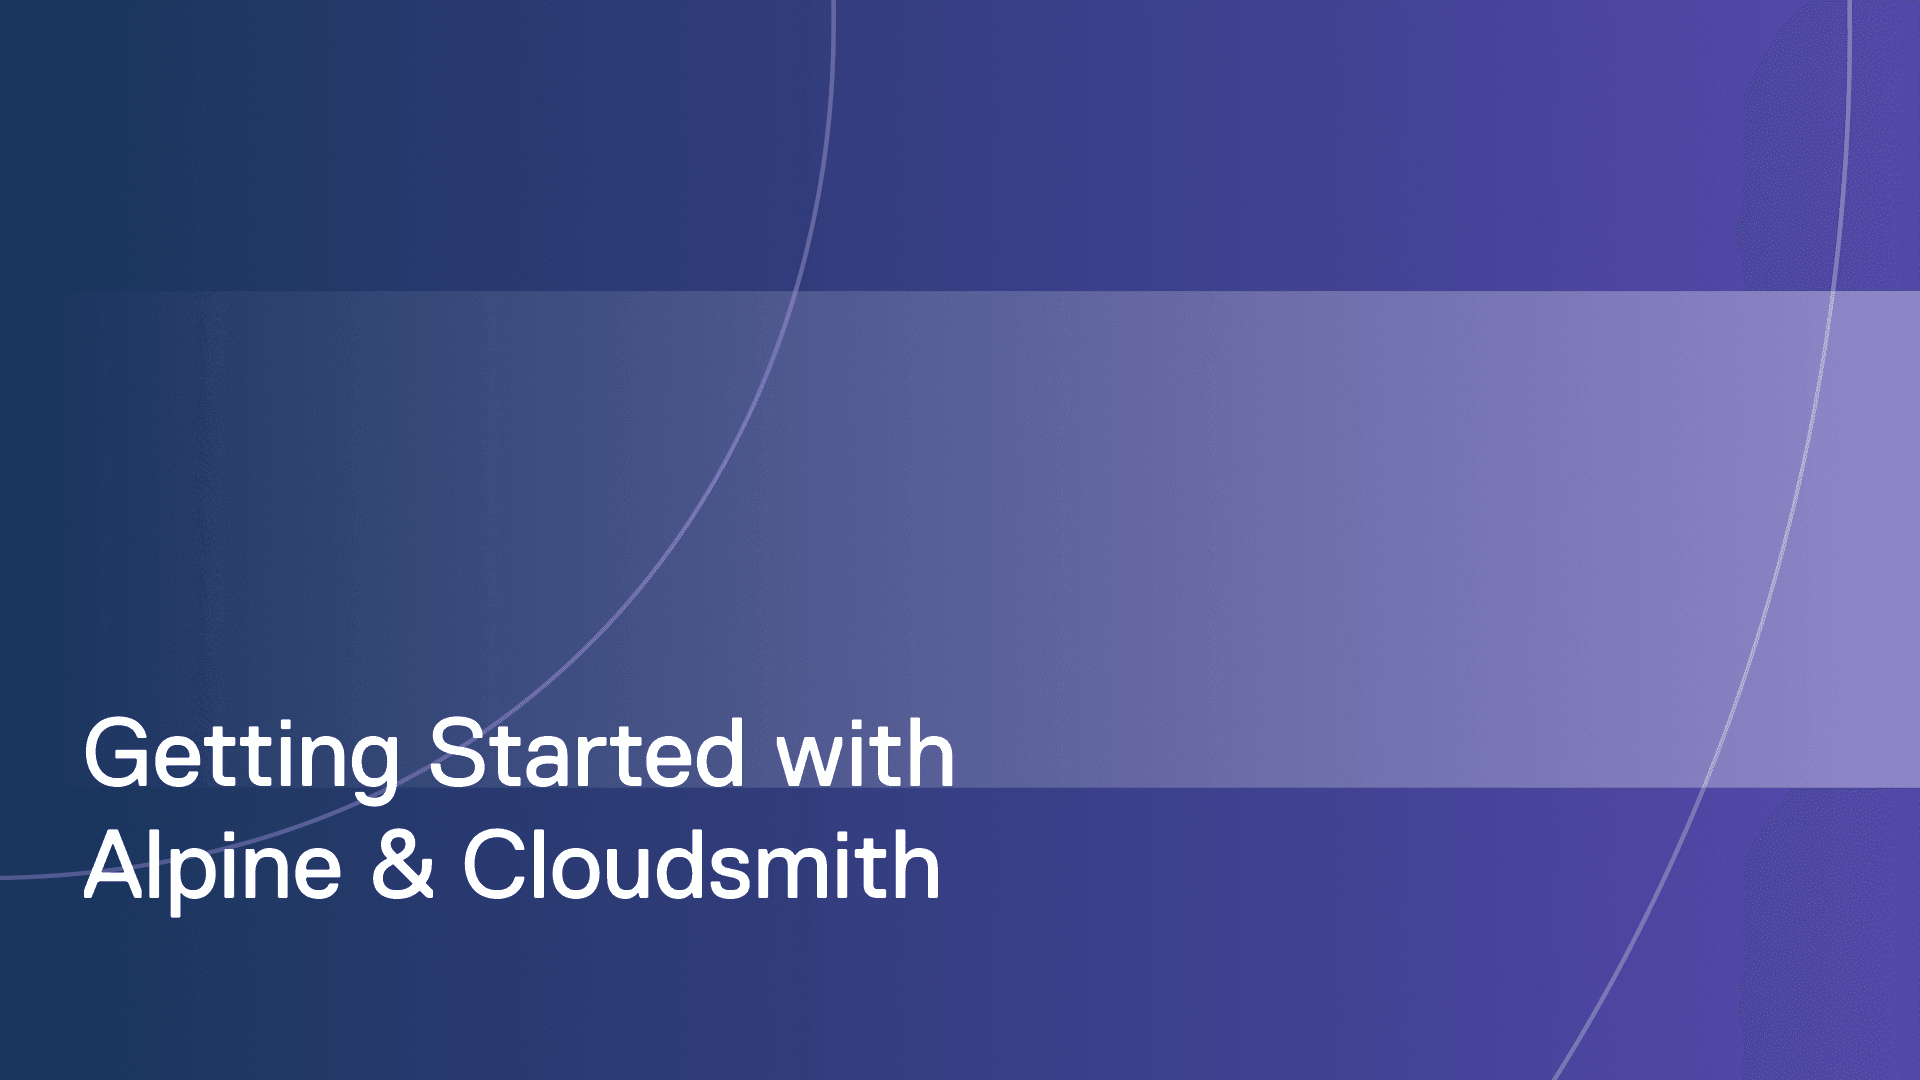 Getting started with Alpine and Cloudsmith